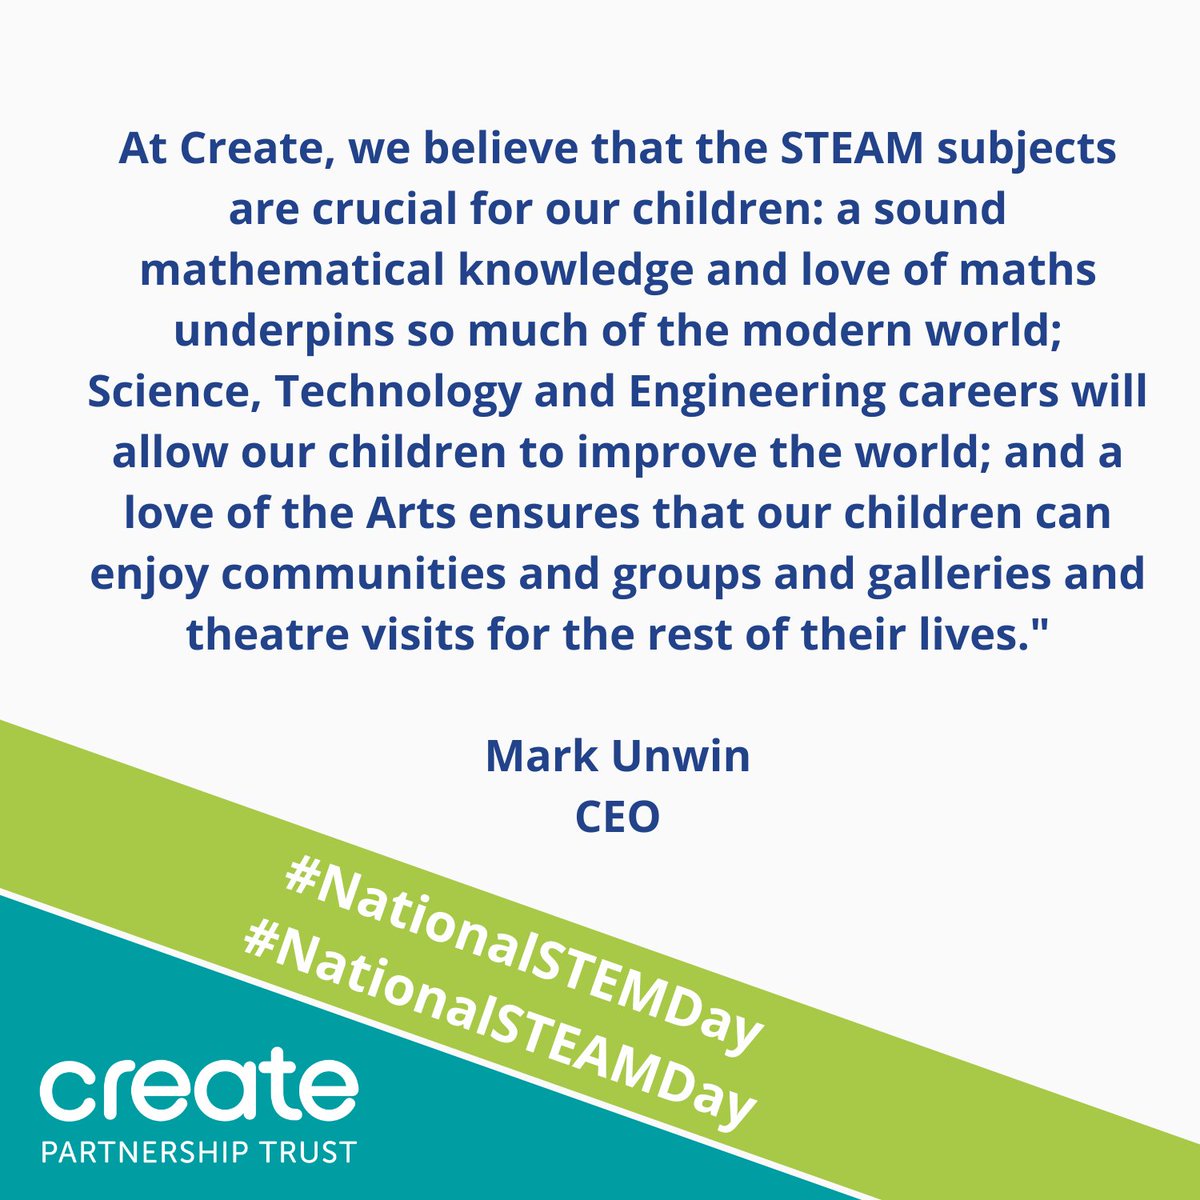 Our CEO @misterunwin shares his thoughts on #stemsubjects on #nationalstemday #nationalsteamday #wearecreate